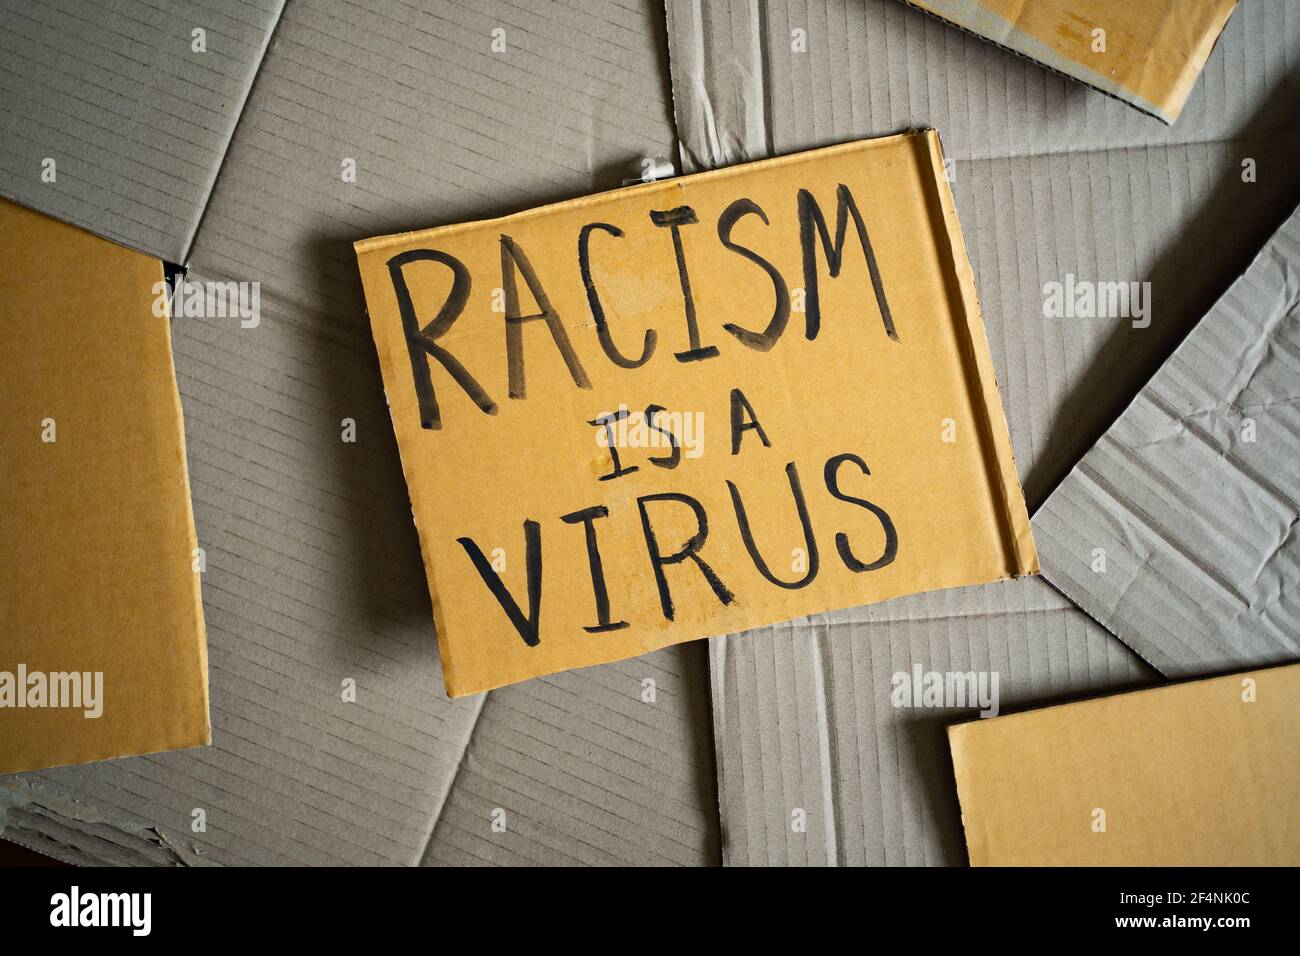 Racism is a virus was written on a cardboard Stock Photo